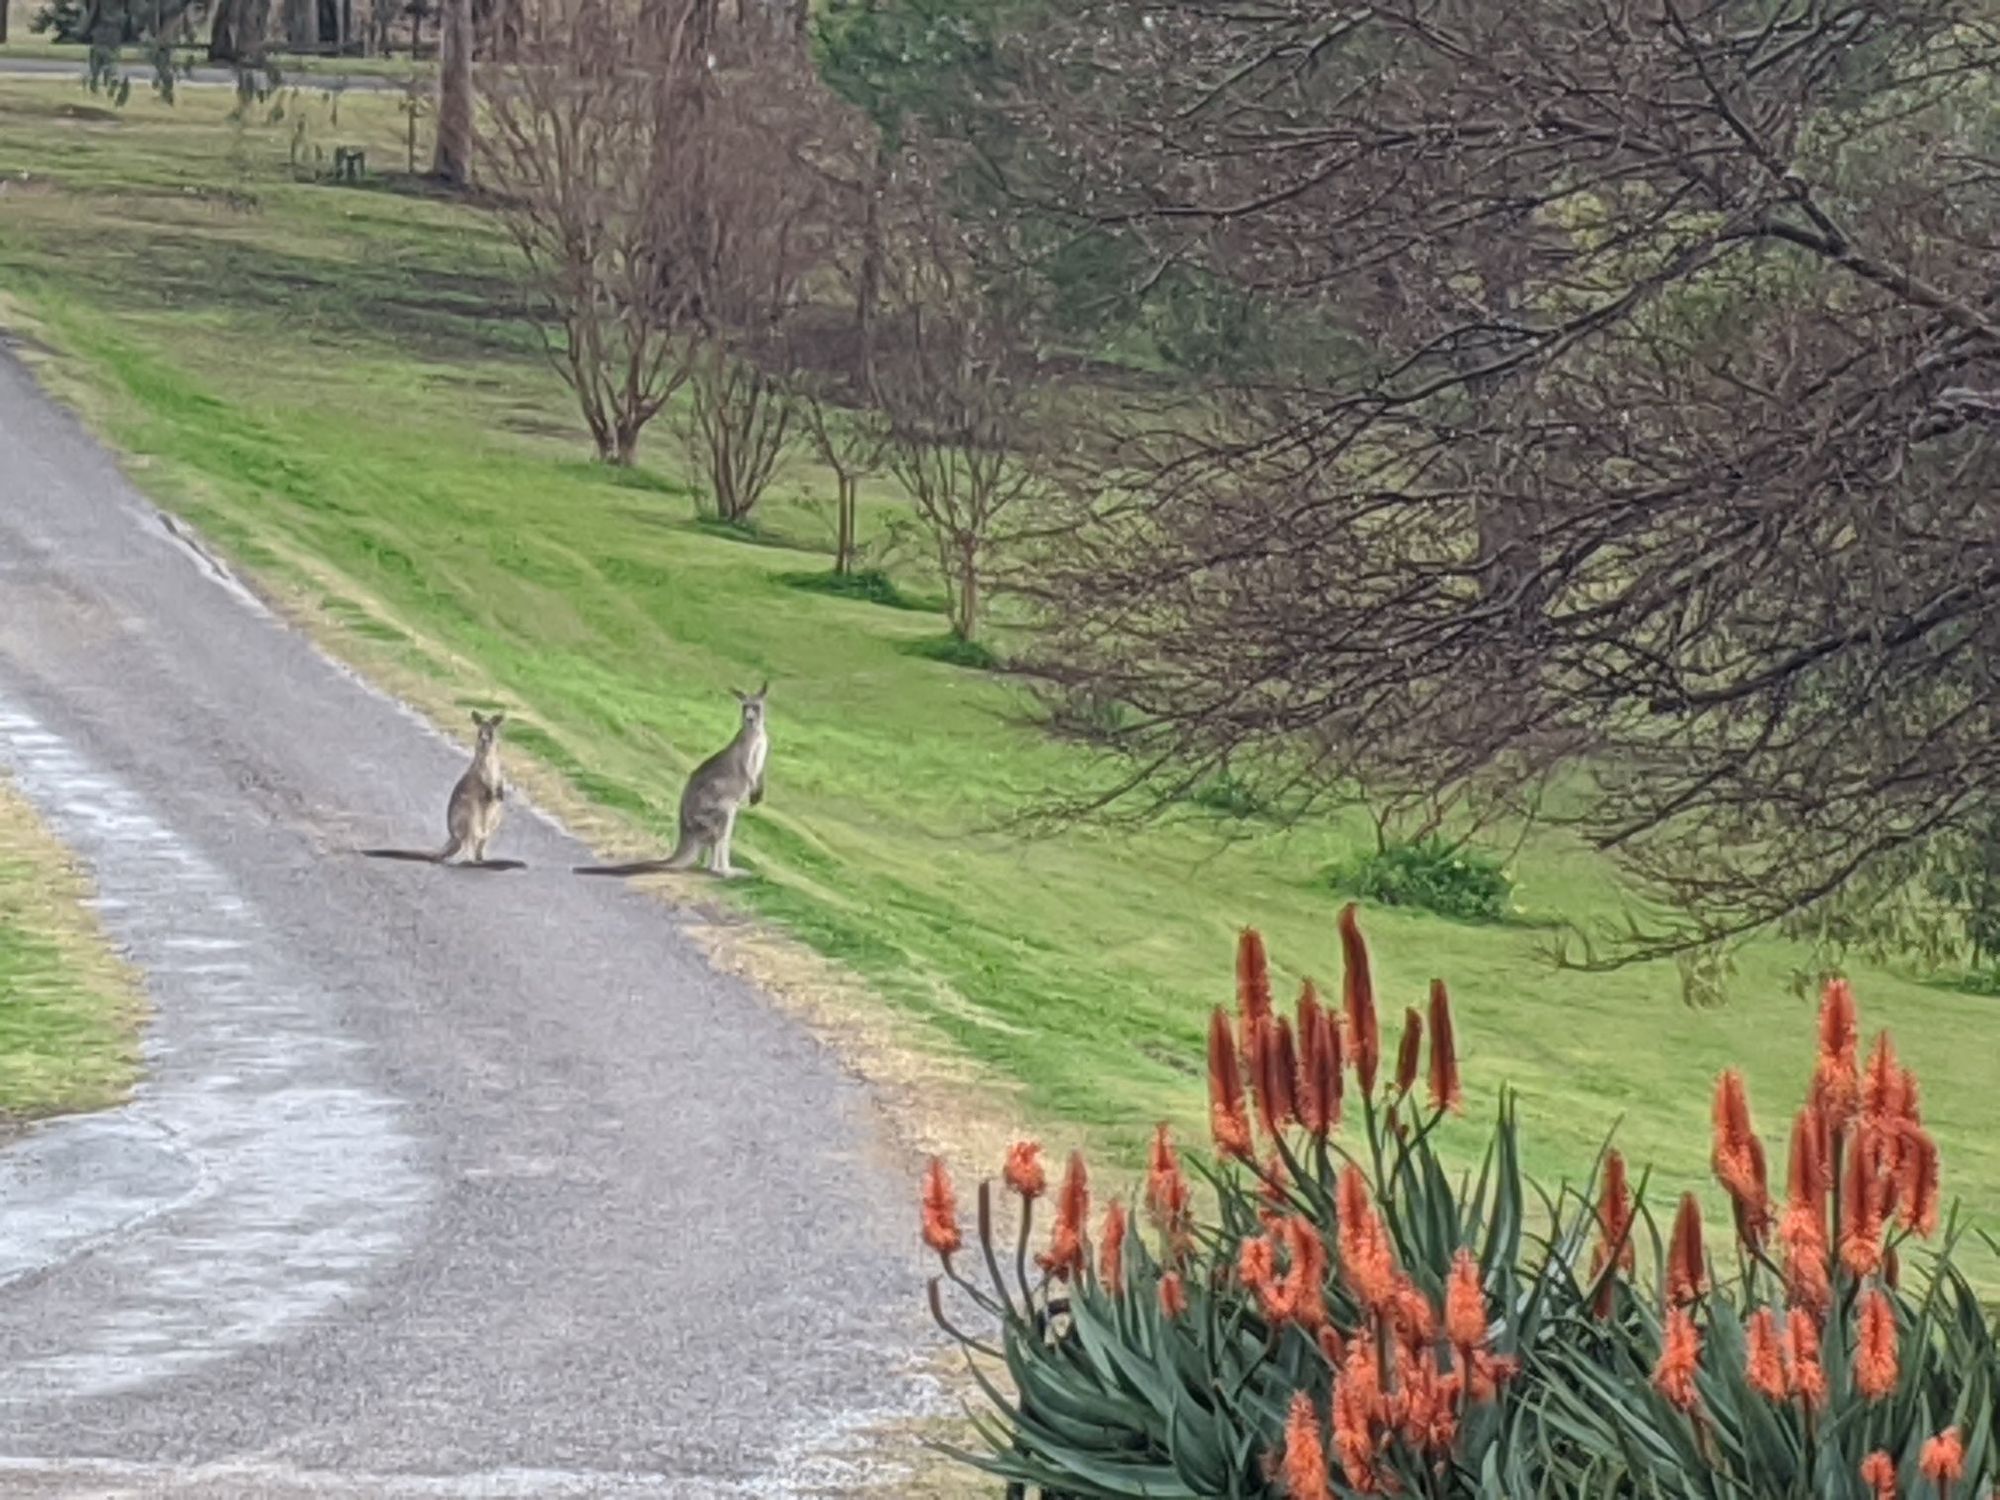 Two Kangaroos crossing the driveway. Grassy landscape in background.